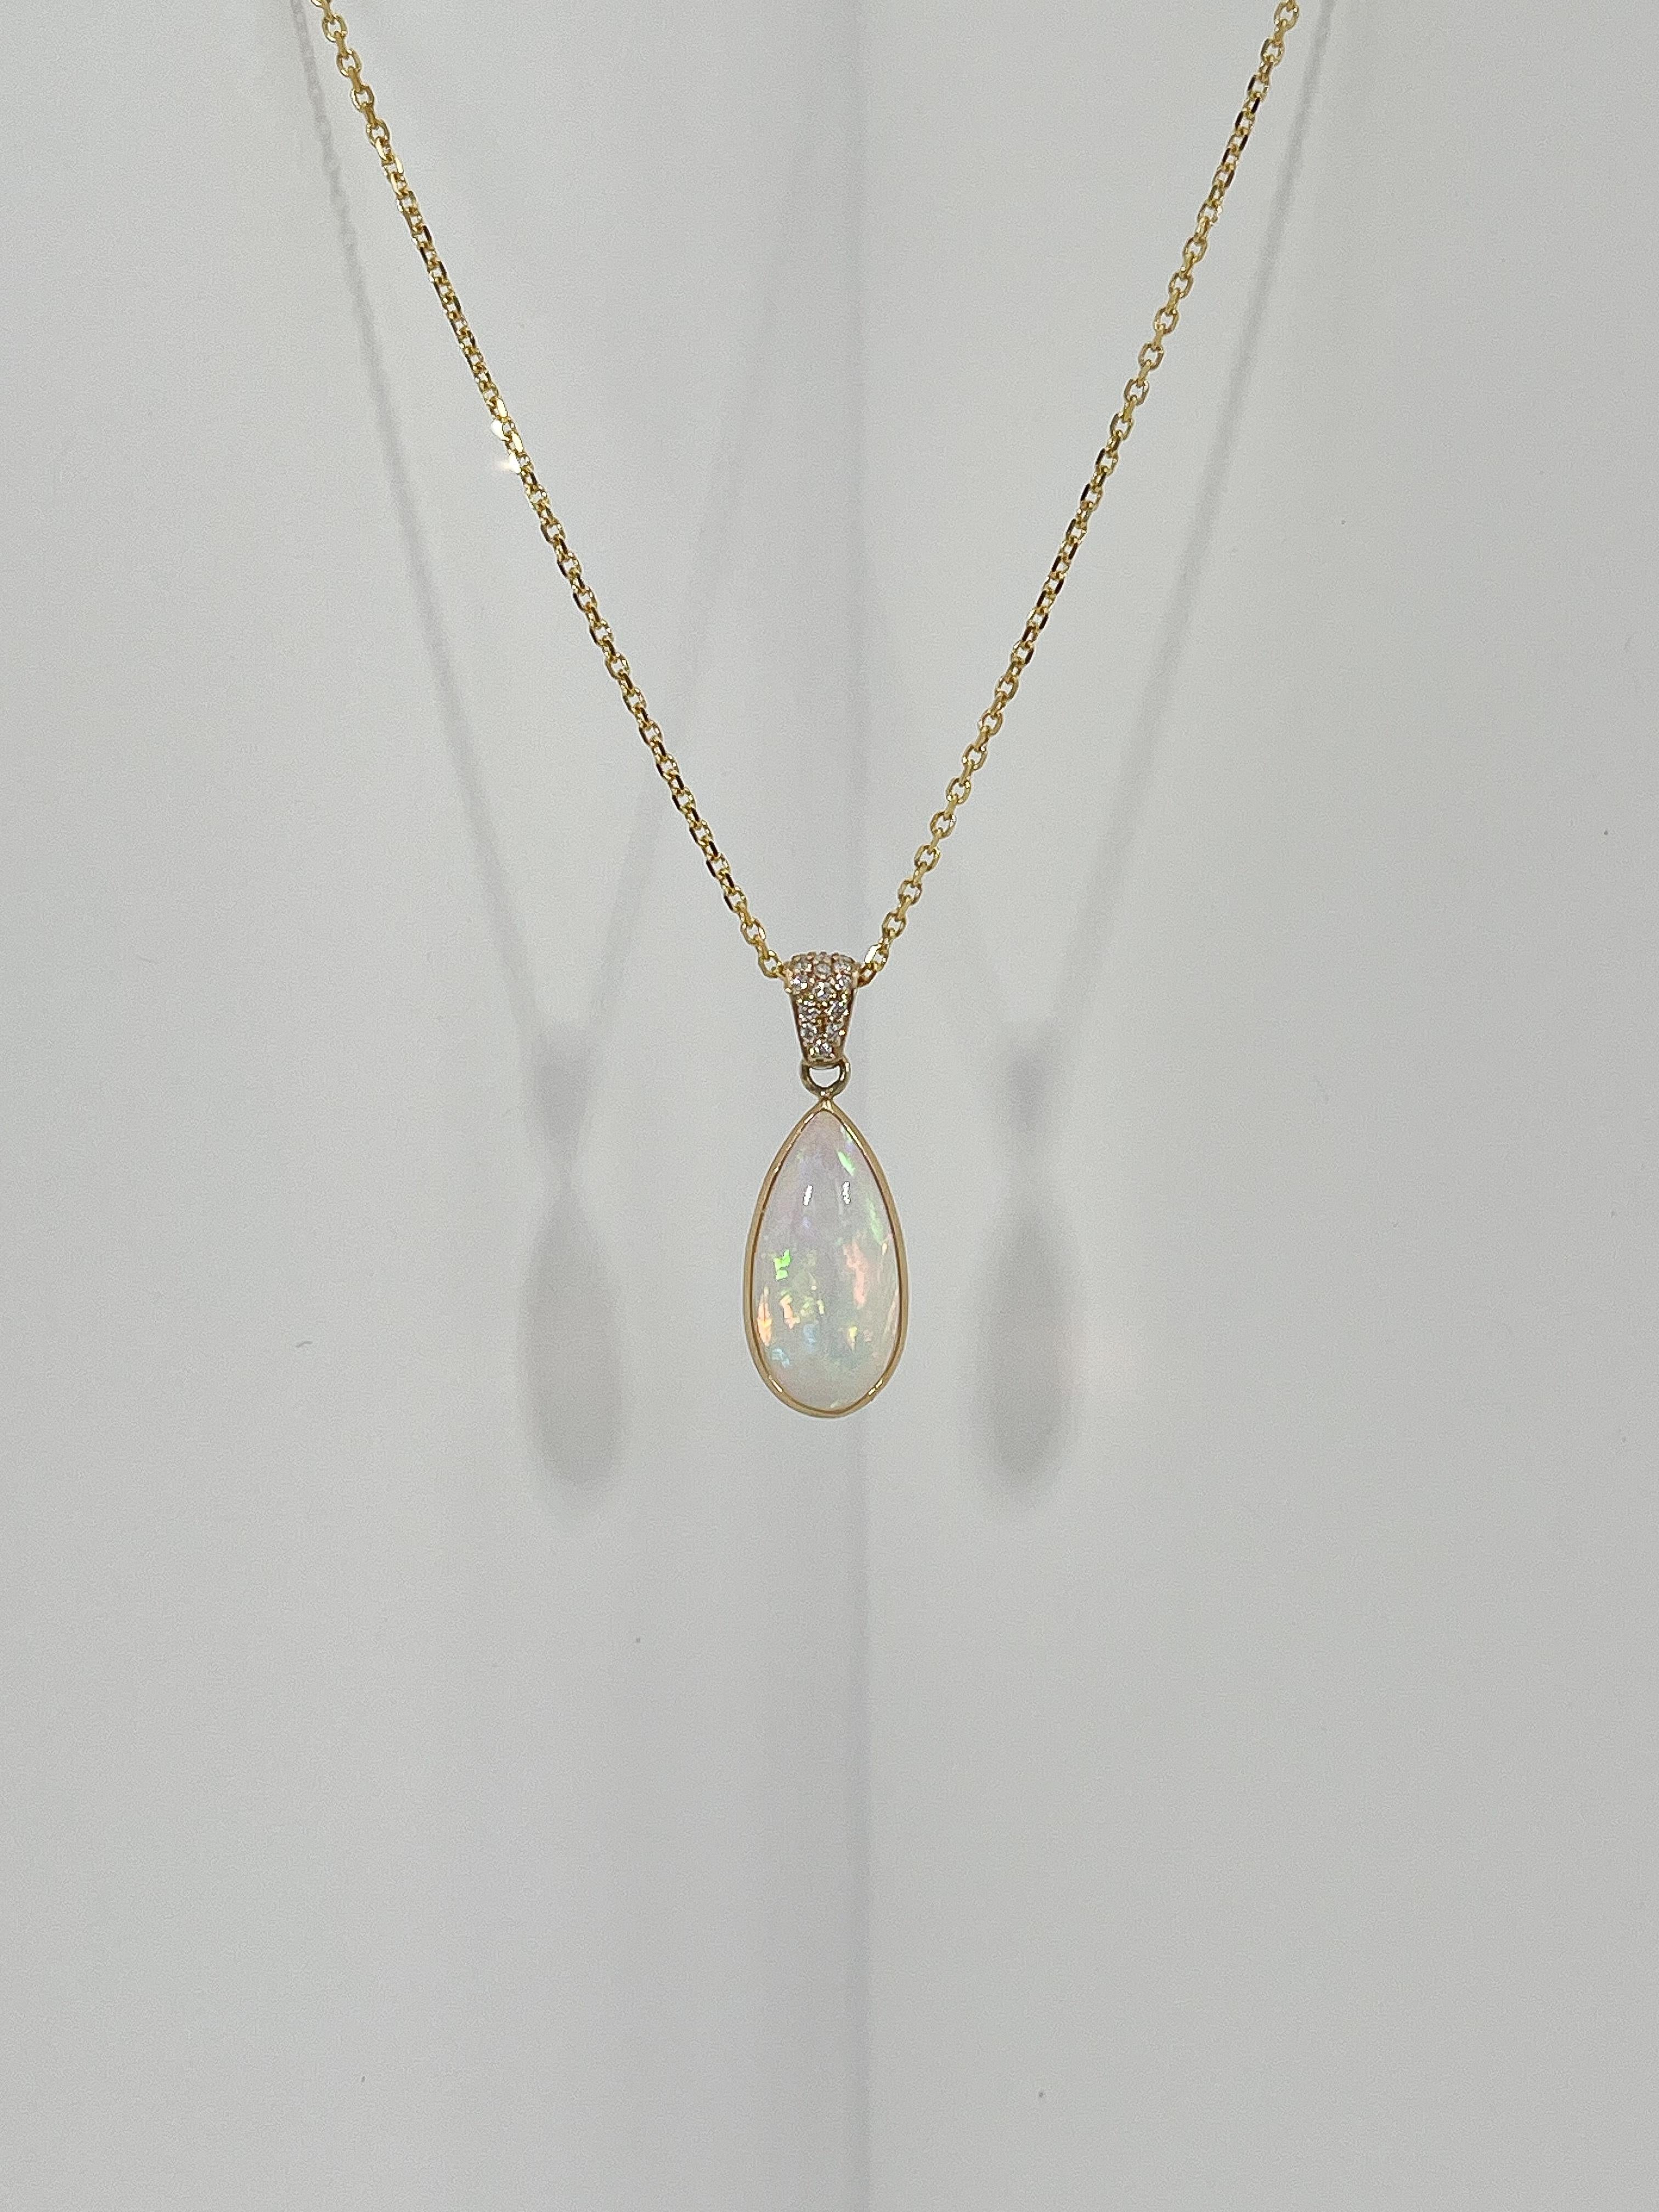 14k yellow gold pear opal and .07 Ct diamond pendant necklace. The diamonds in the bail are all round, the measurements of the pendant are 17.5 x 8.5 mm, the length of the necklace is 20 inches, and has a total weight of 3.75 grams.